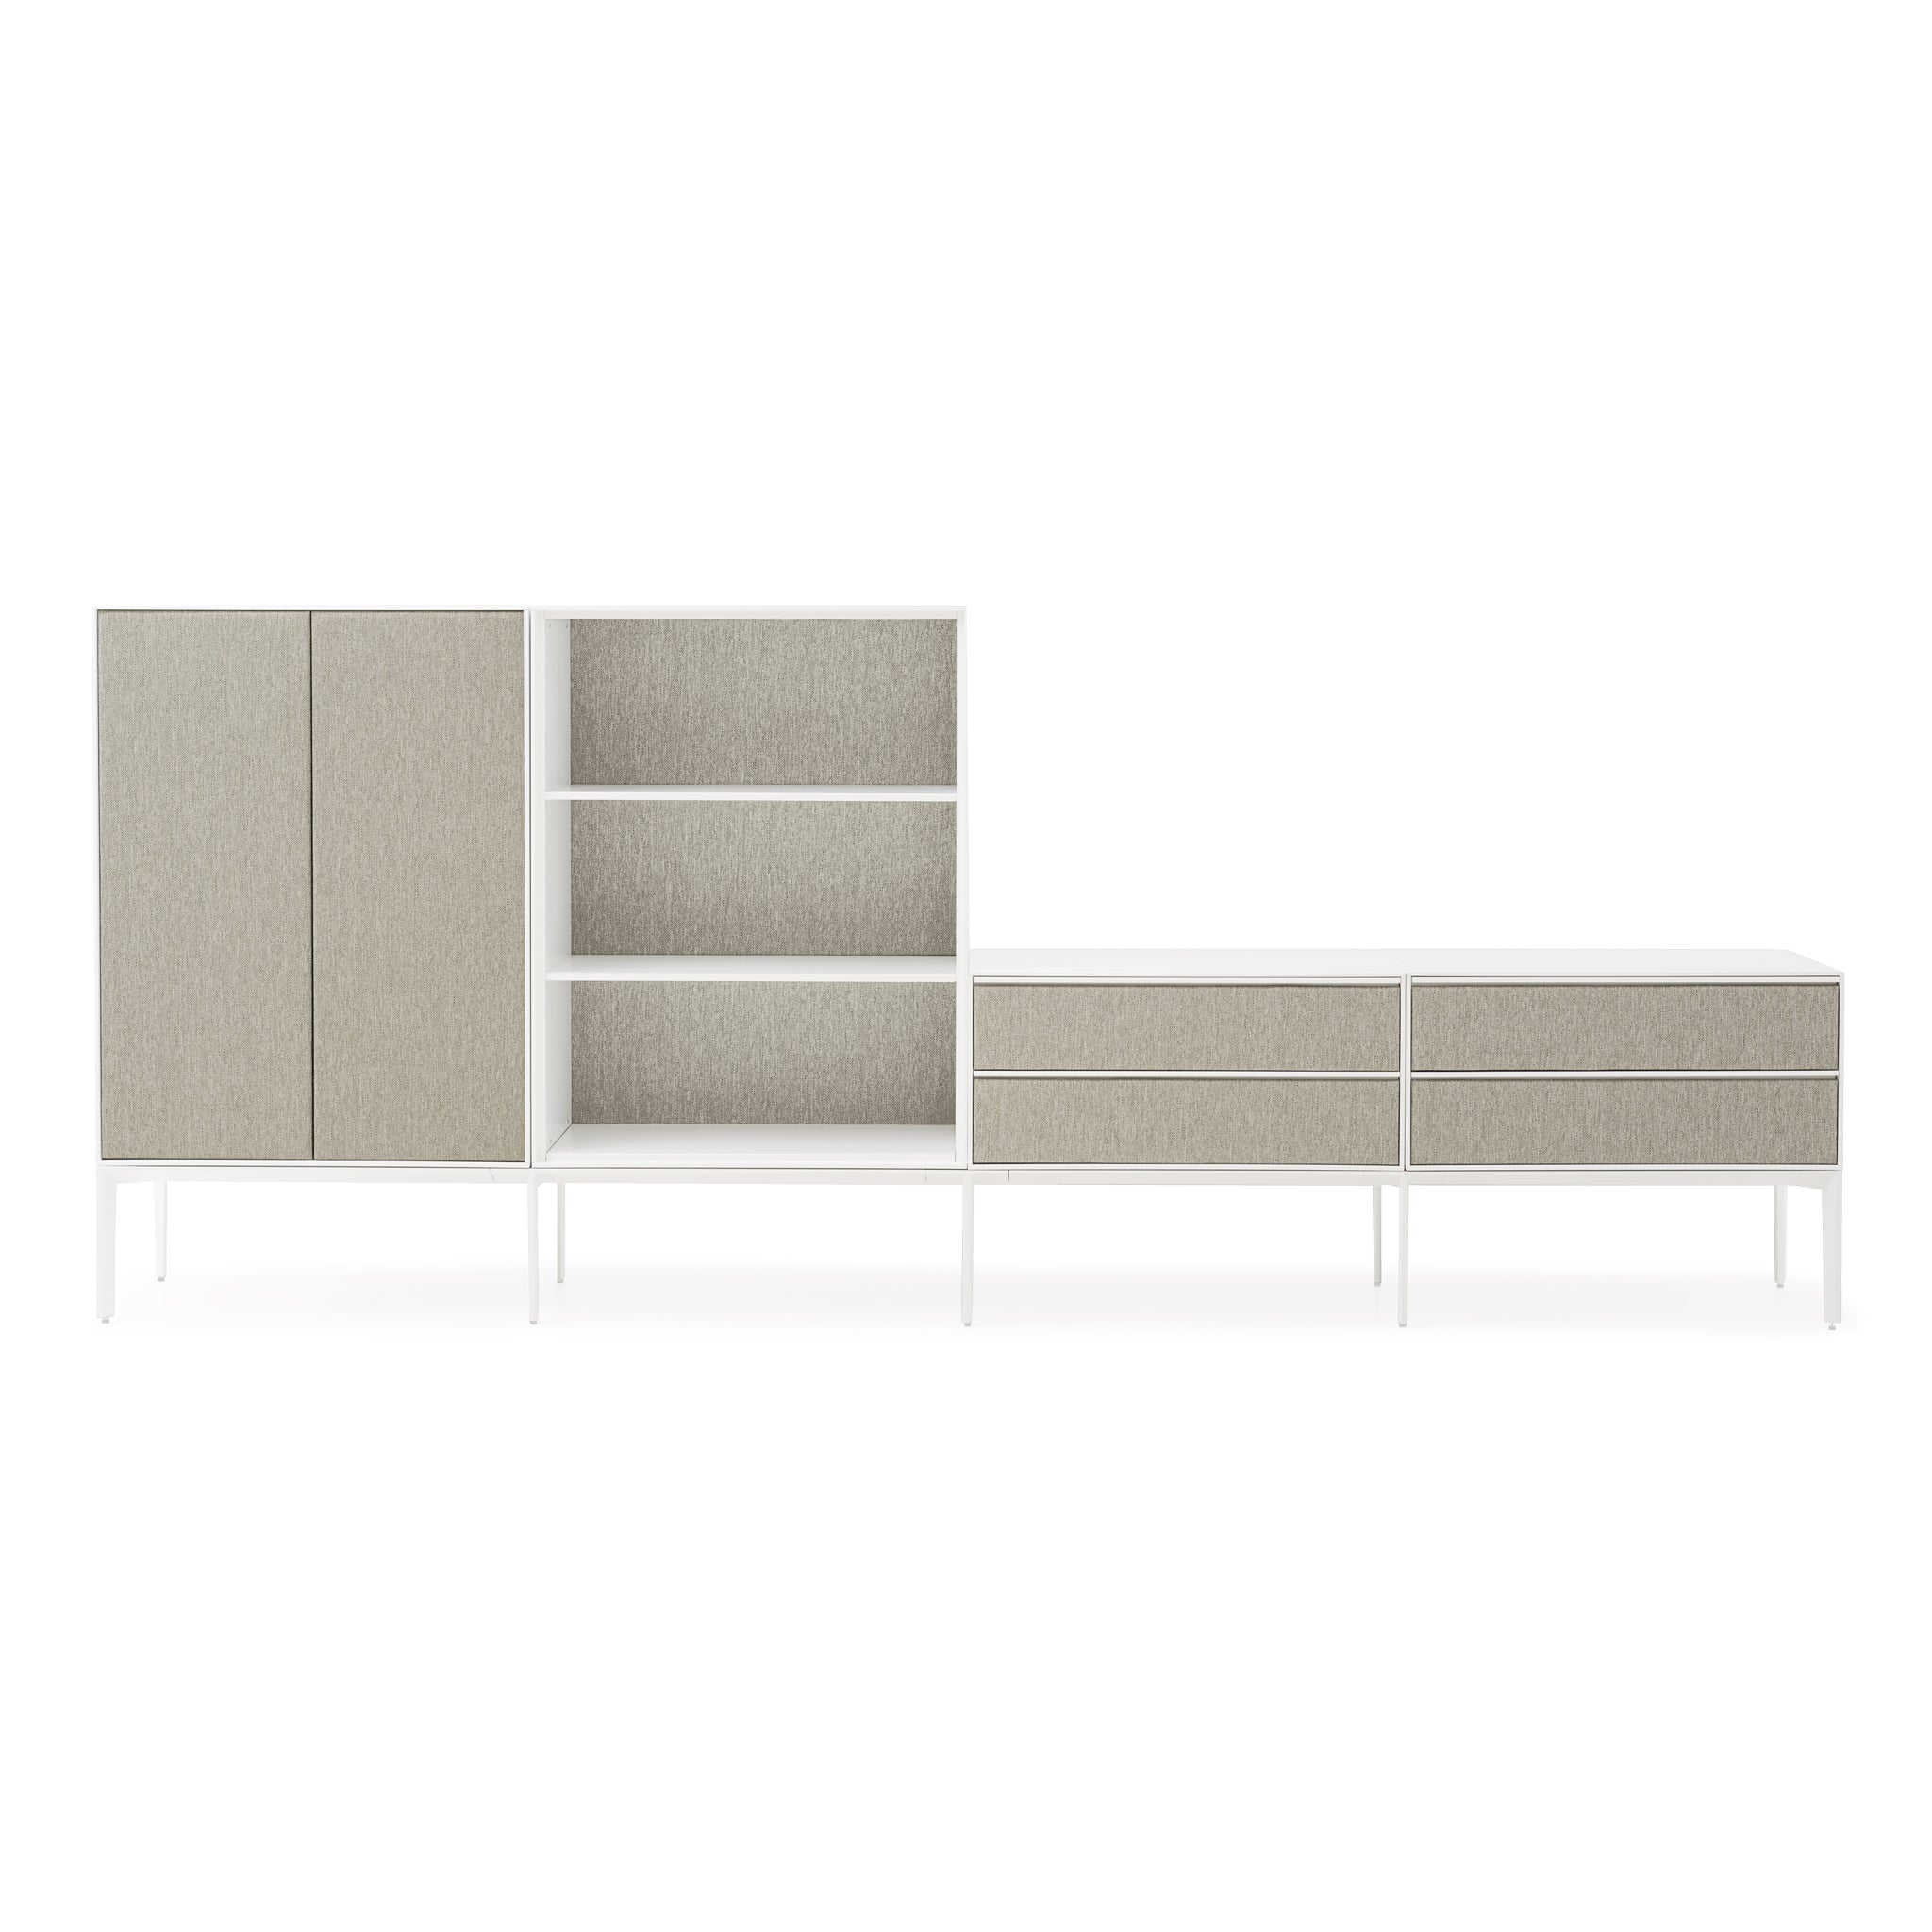 Lapalma ADD S office storage high end modern office furniture